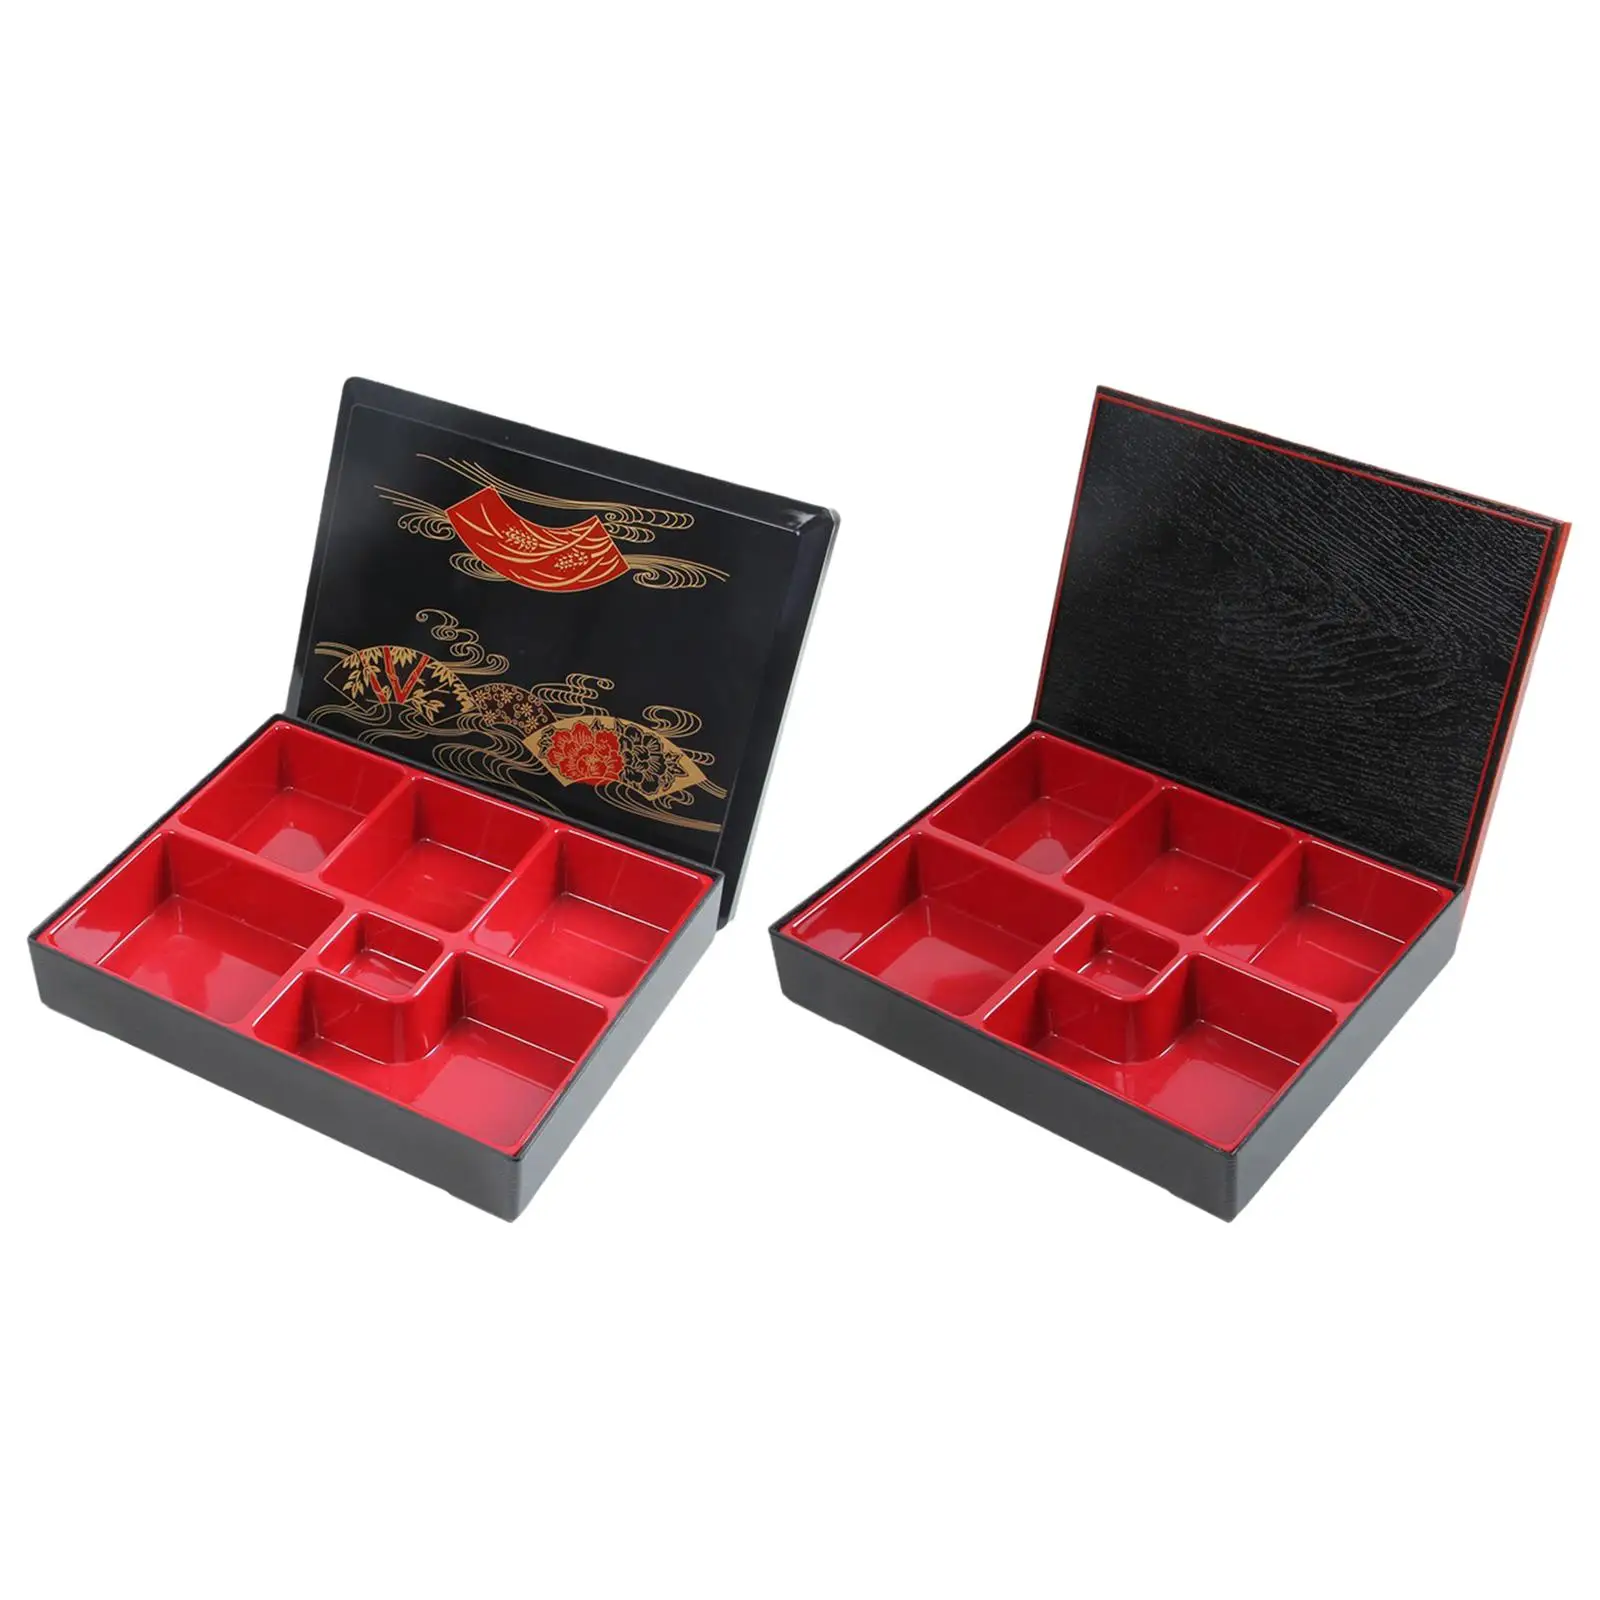 Japanese Bento Box Food Container for Restaurant Picnic Sushi, Rice, Sauce